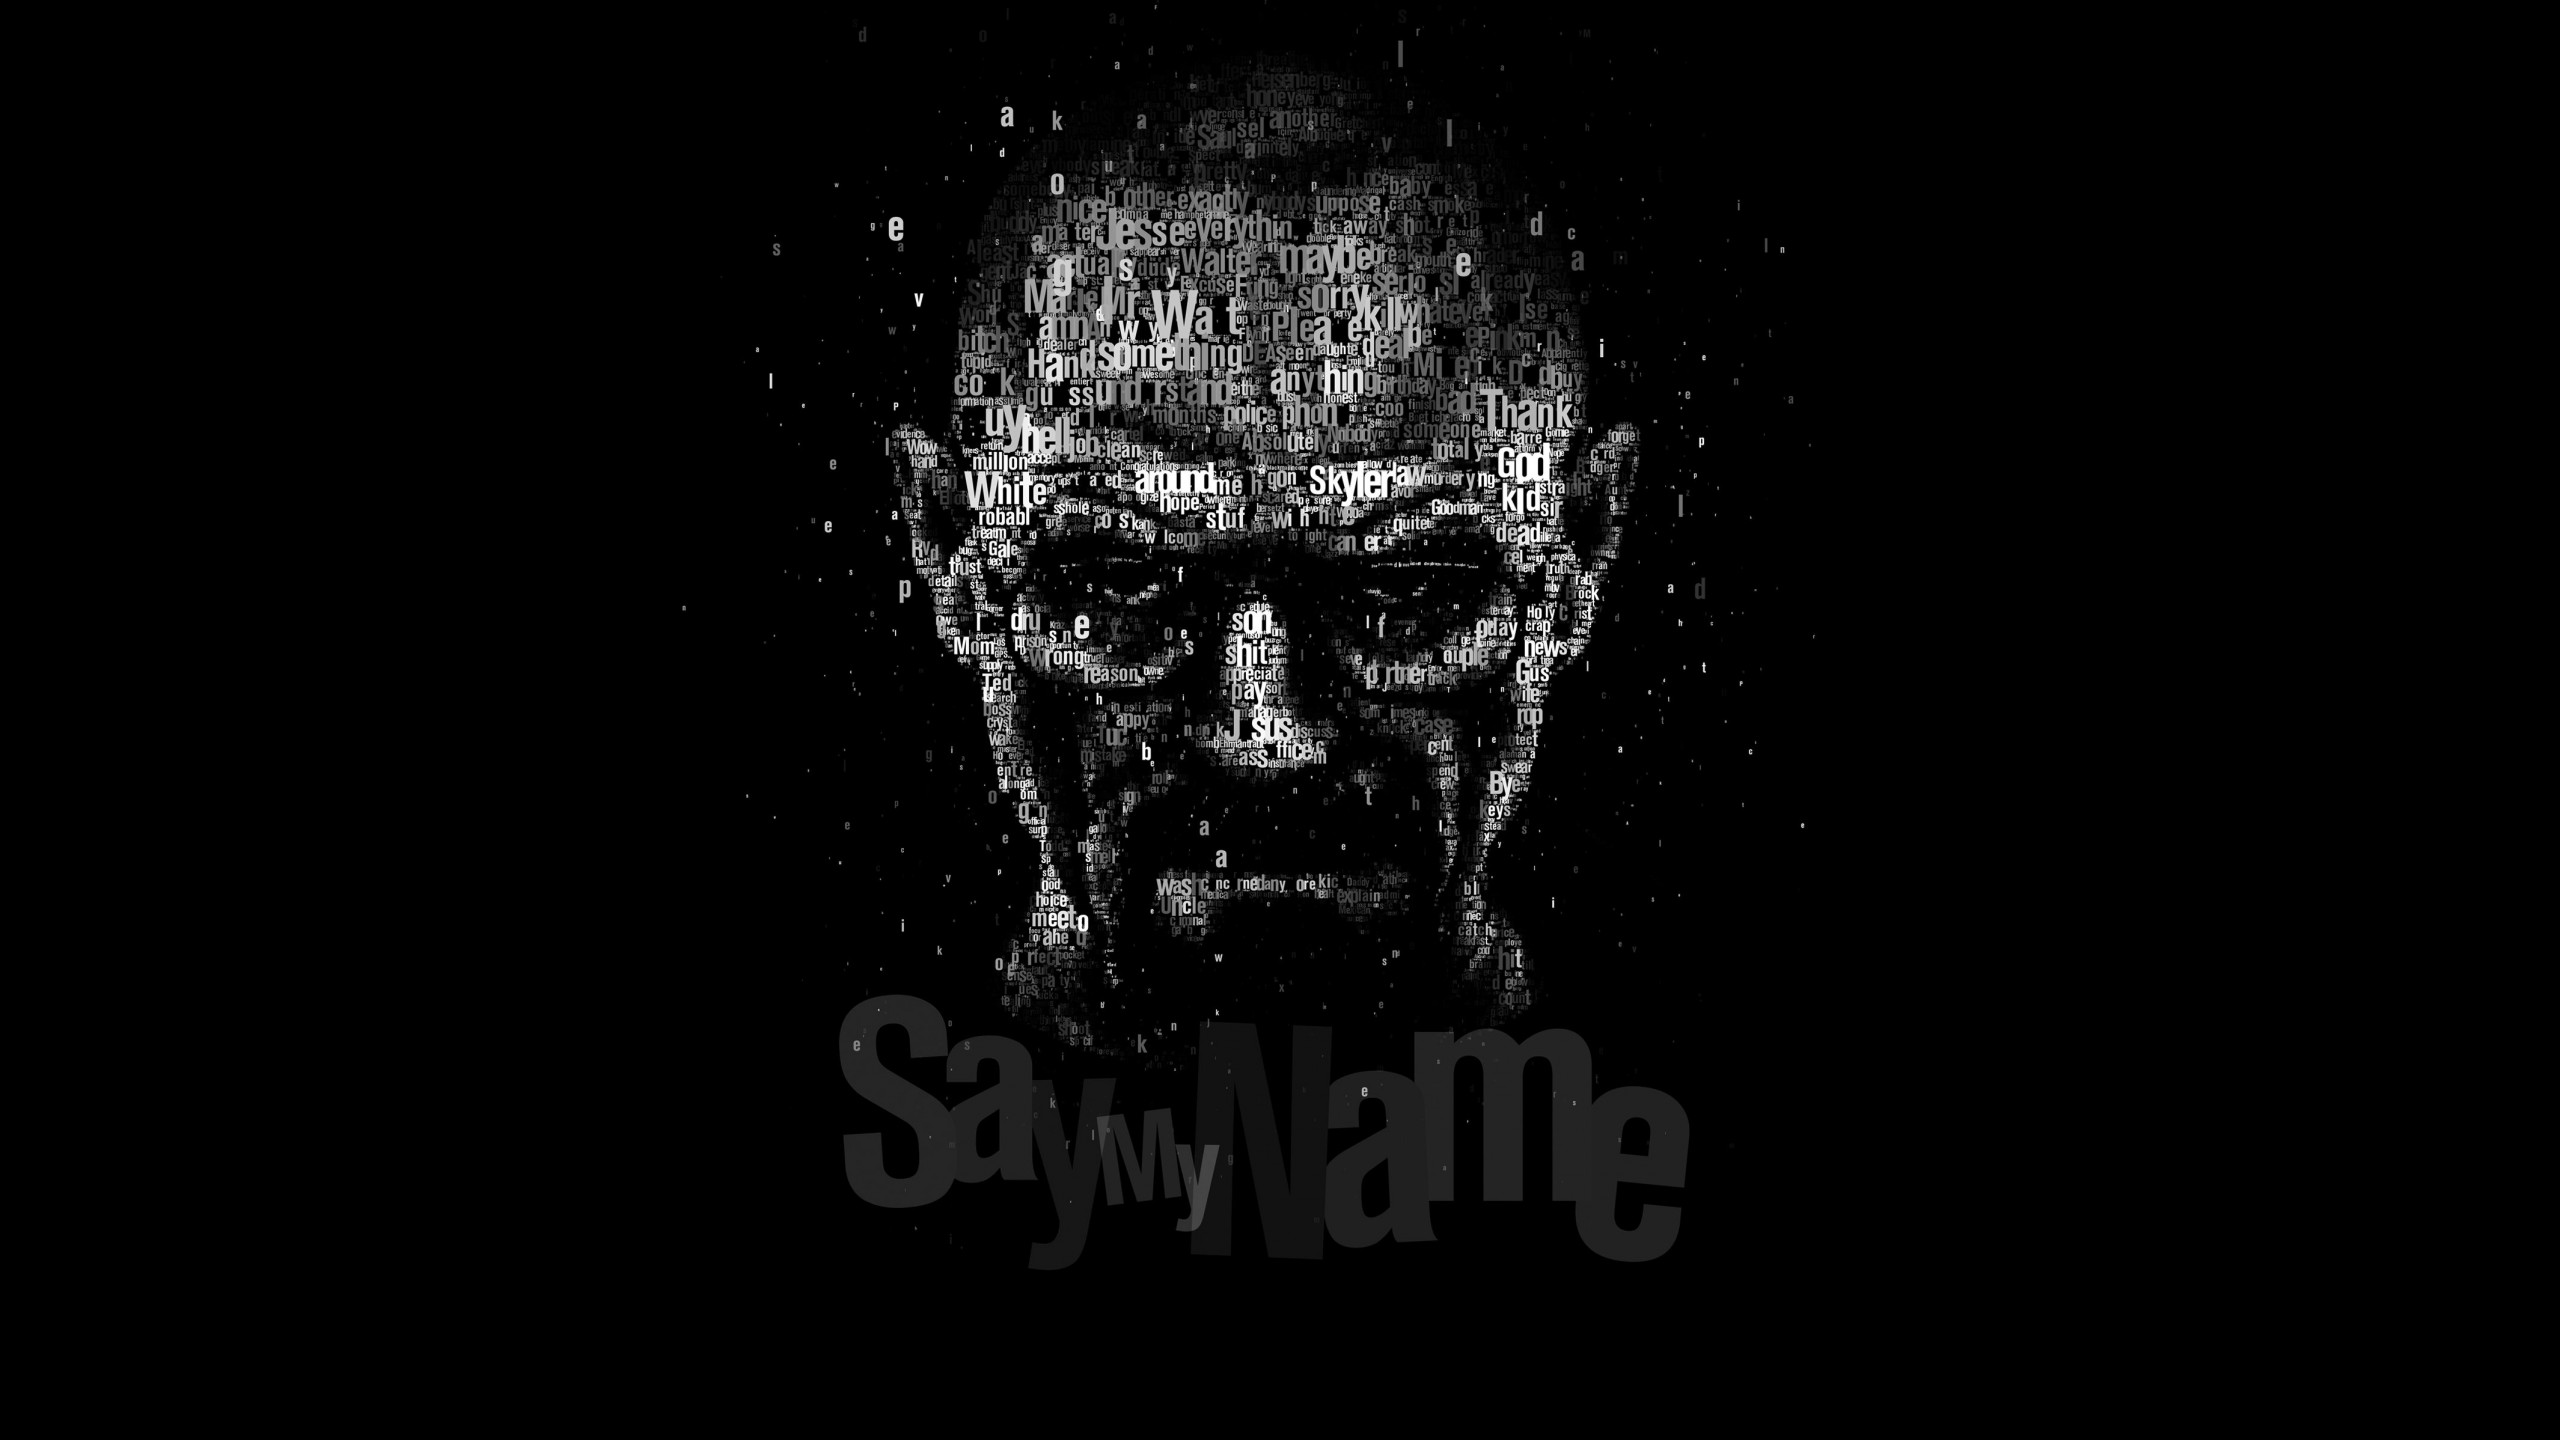 Say My Name - Typography Art Wallpaper for Social Media YouTube Channel Art